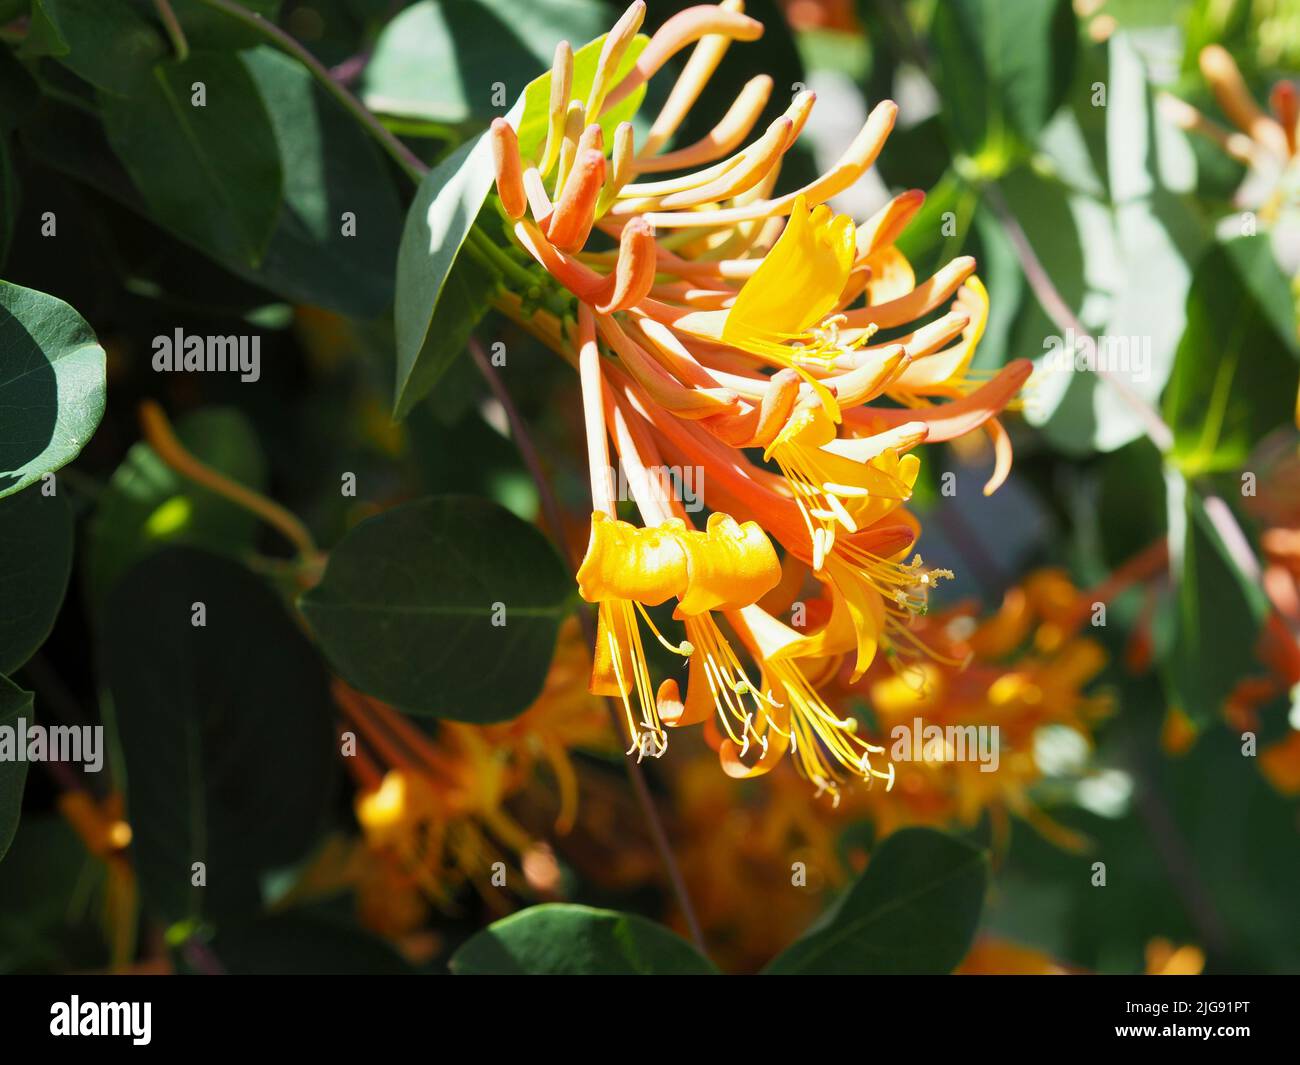 Astonishing orange and yellow flowers of a honeysuckle (Lonicera sempervirens) in bloom in a garden in Ottawa, Ontario, Canada. Stock Photo